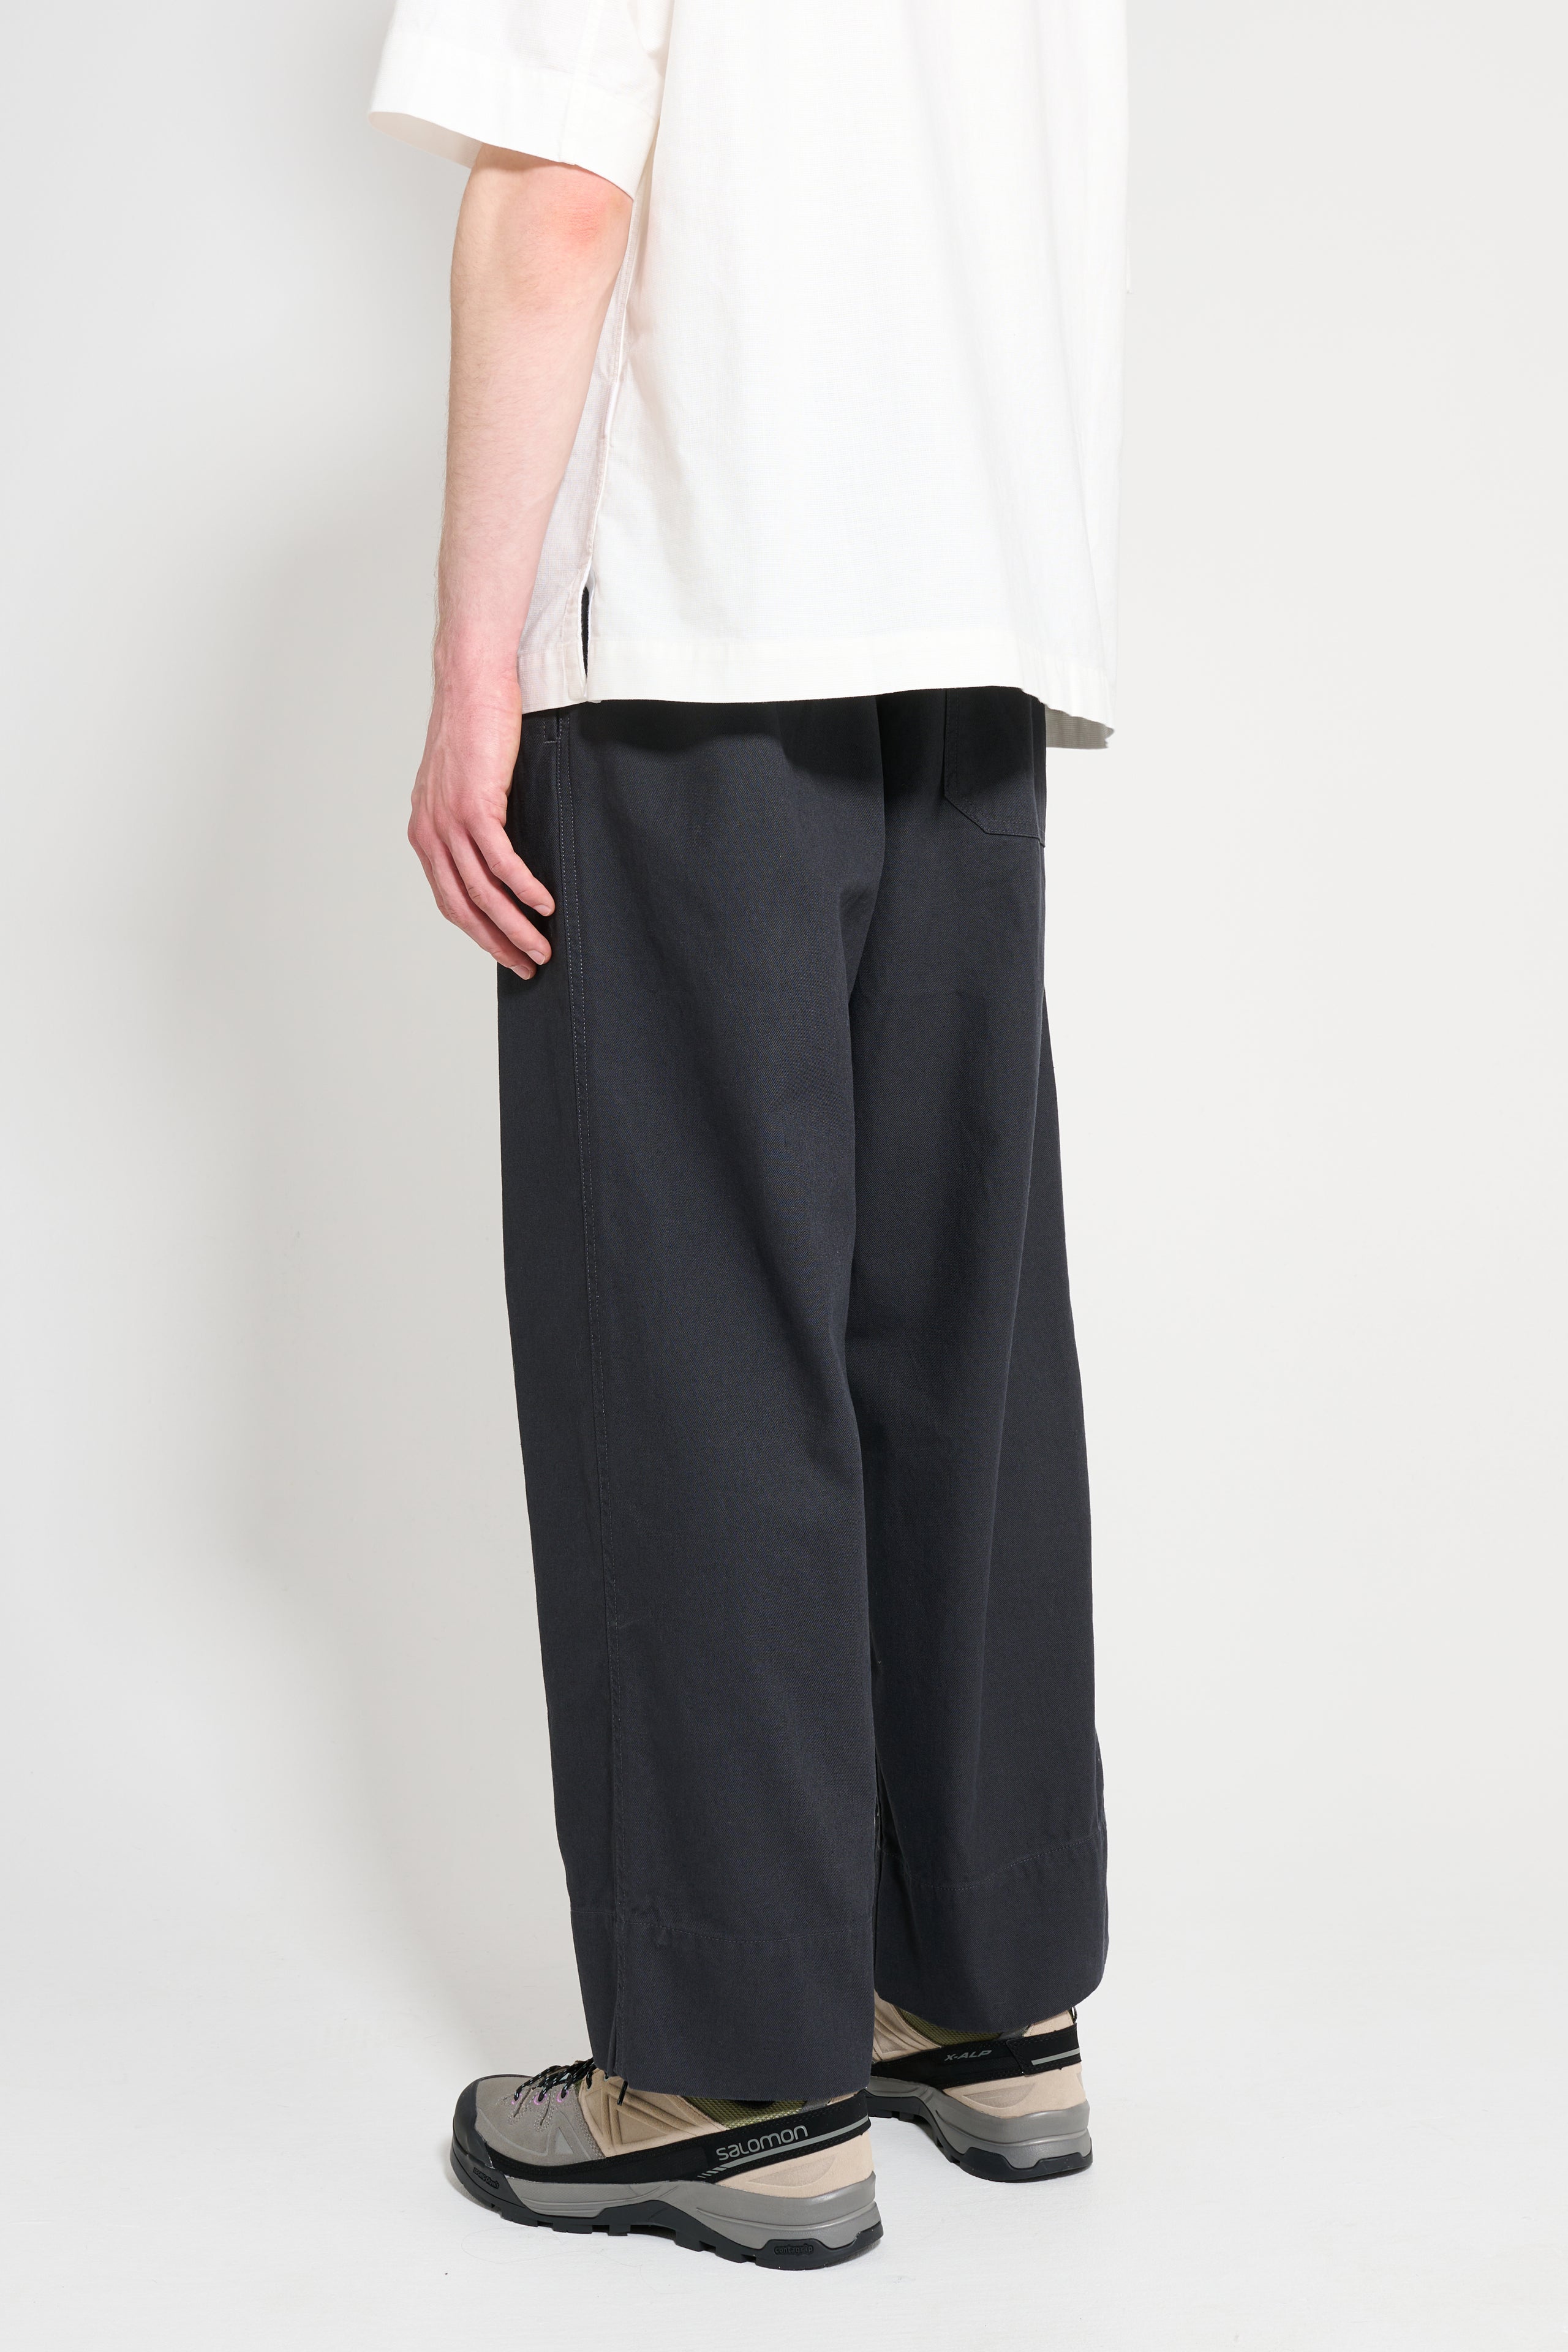 Margaret Howell MHL Painters Trousers Dry Cotton Garbadine Charcoal